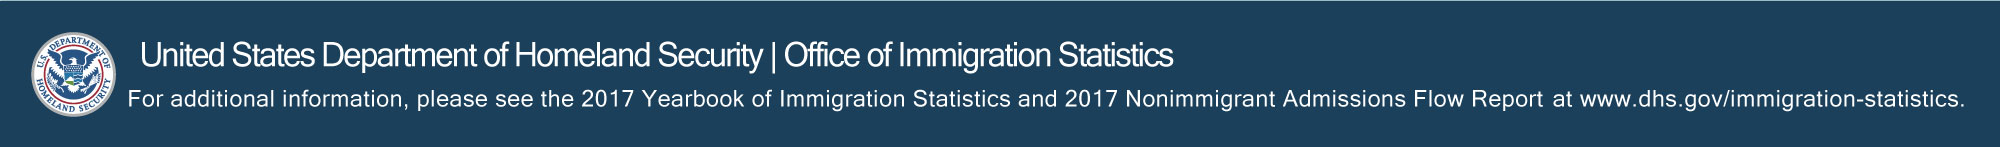 United States Department of Homeland Security, Office of Immigraiton Statistics. For additional information, please see the 2017 Yearbook of Immigration Statistics and 2017 Nonimmigrant Admissions Flow report at www.dhs.gov/immigration-statistics.